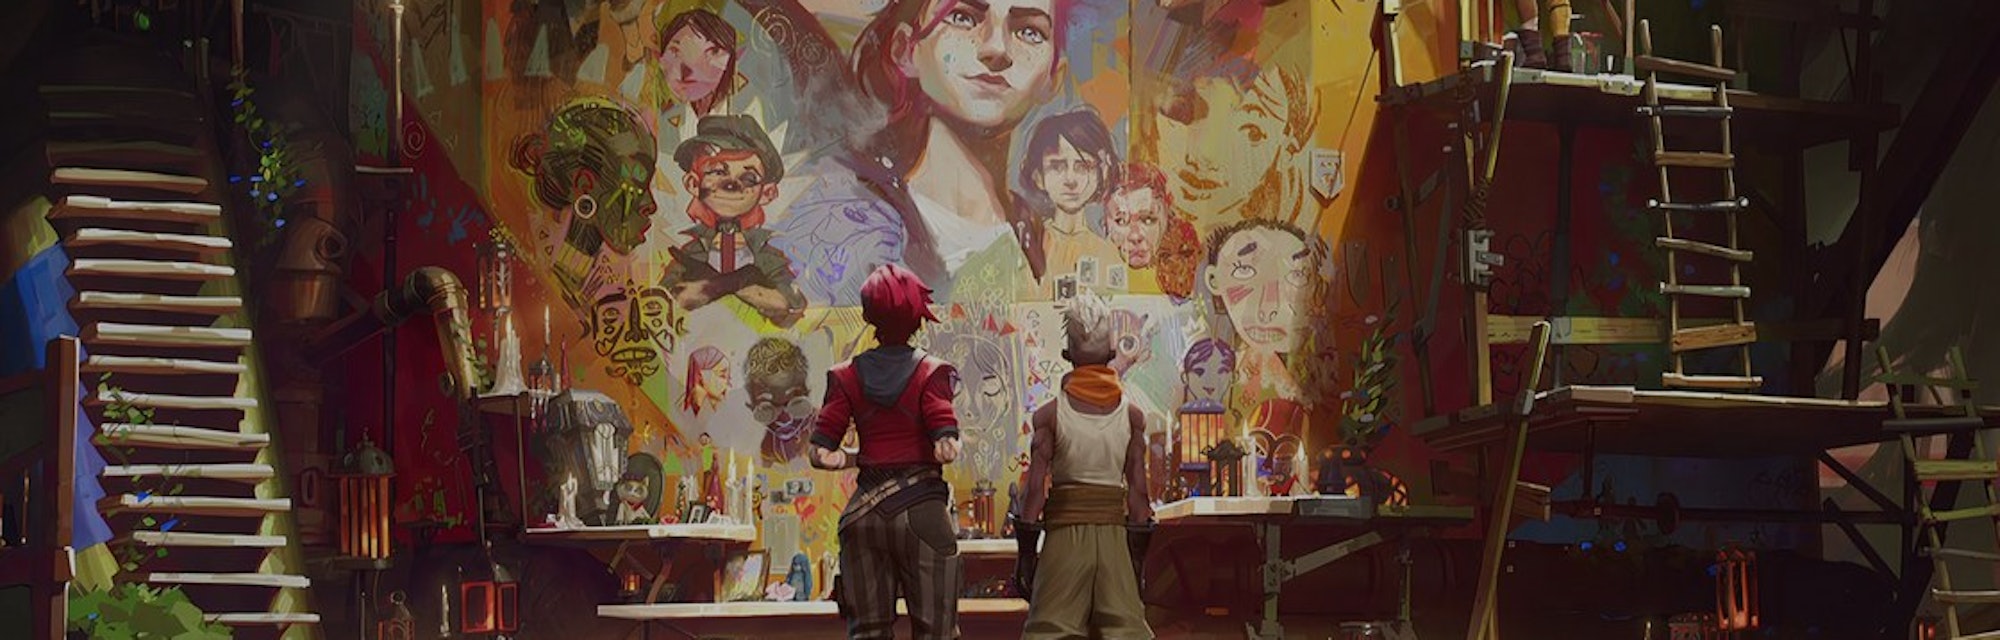 Art showing two League of Legends characters looking up at a painted mural featuring the faces of ma...